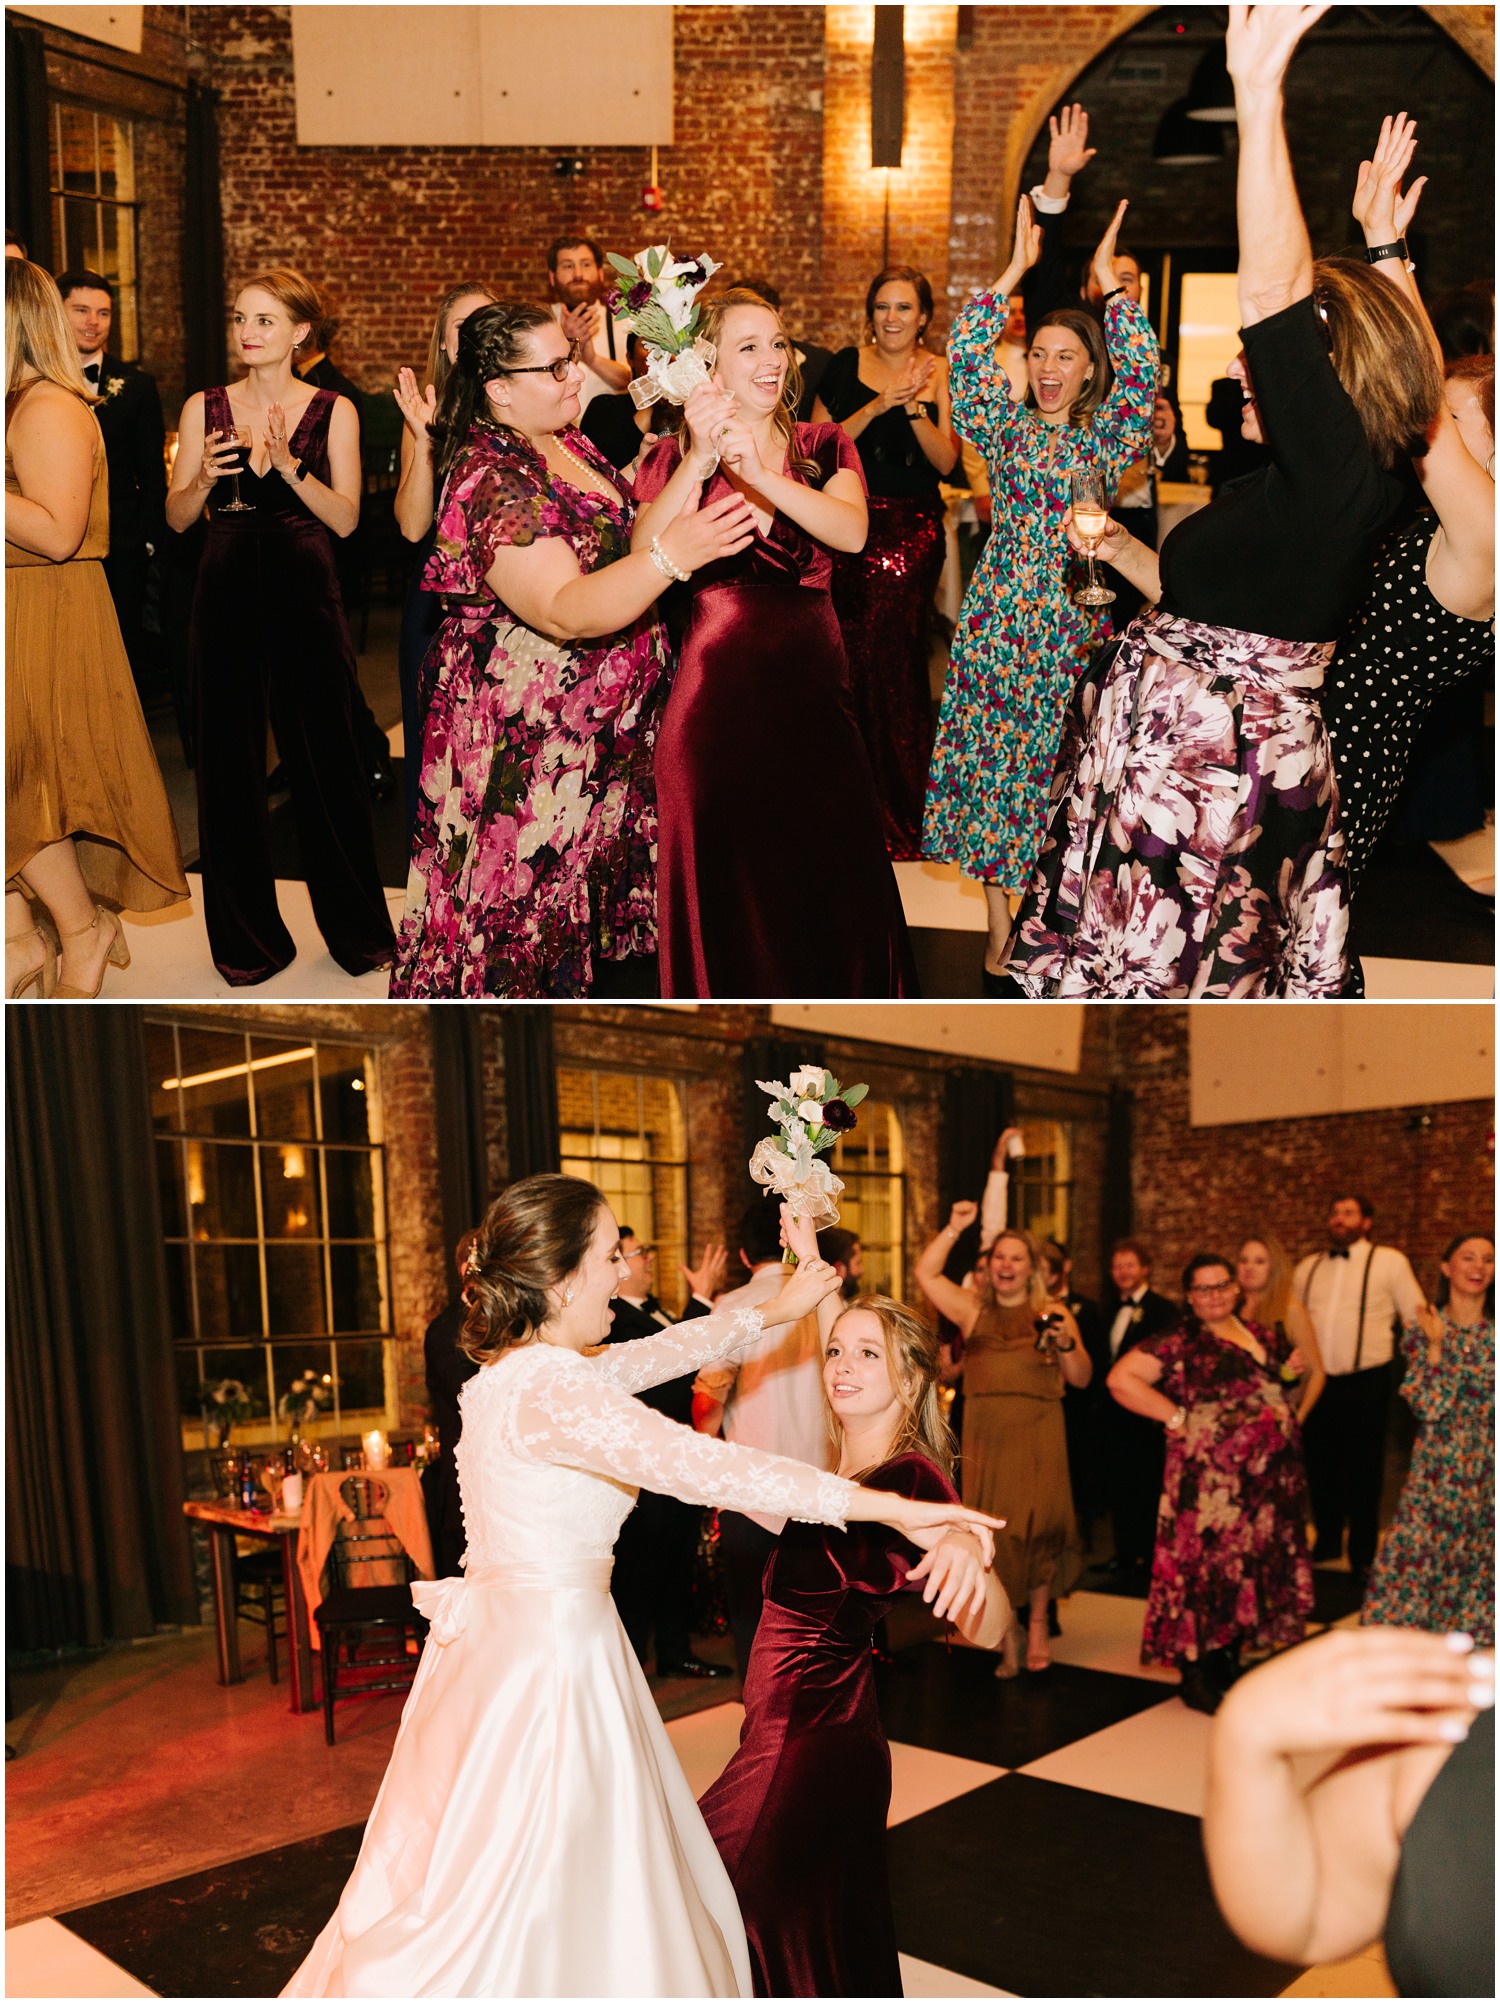 bouquet toss at NC wedding reception photographed by Chelsea Renay Photography